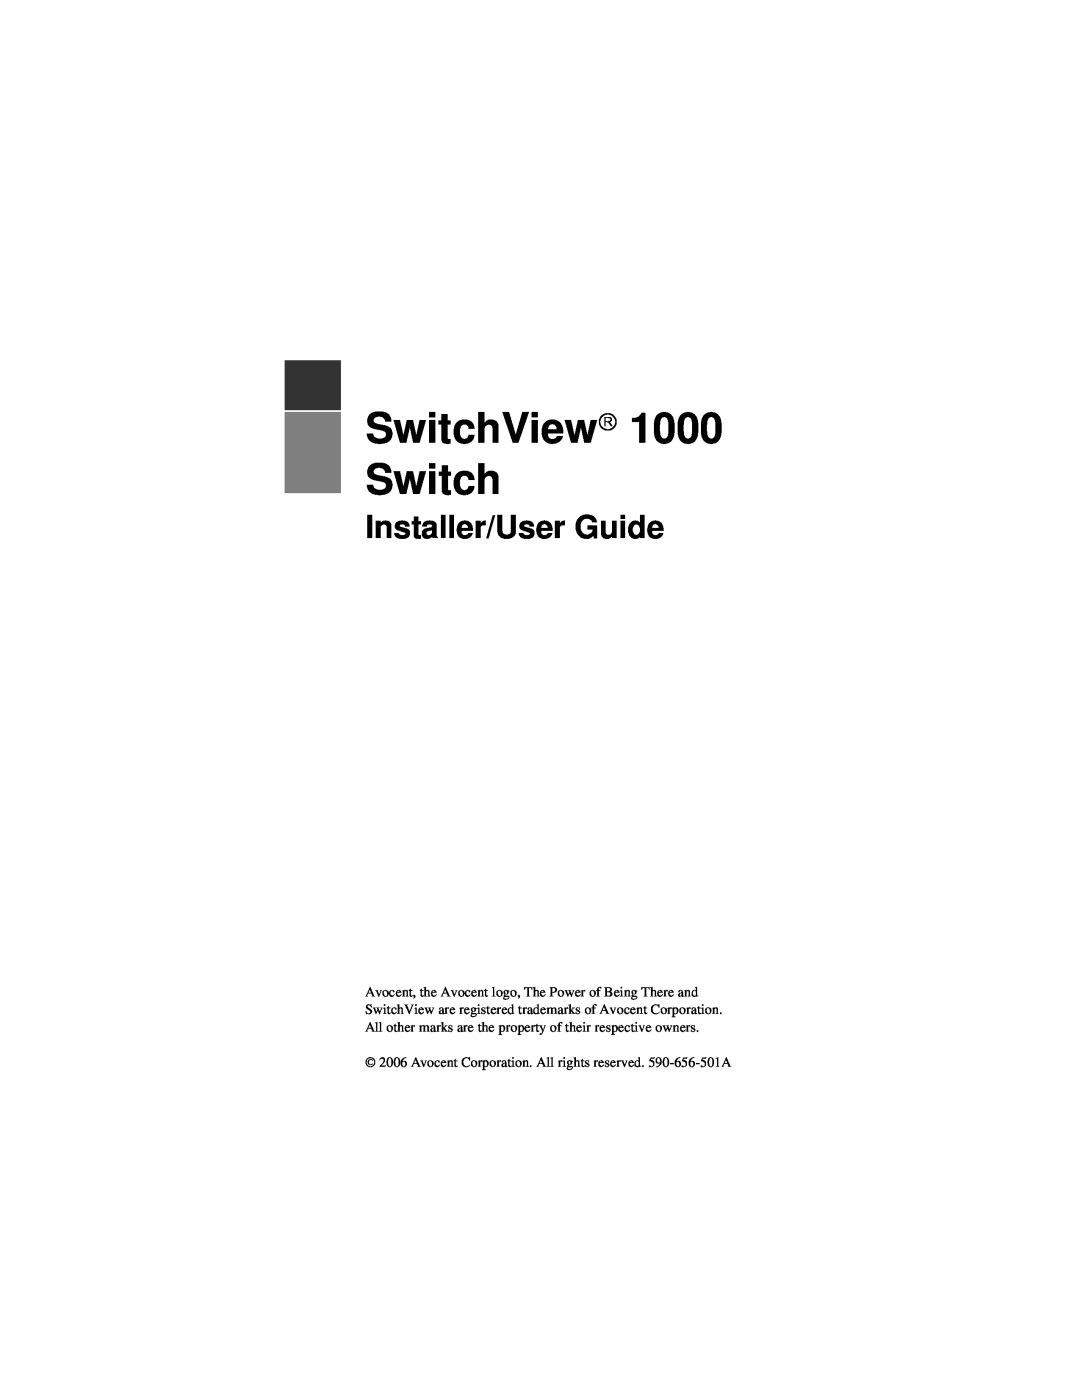 Avocent 1000 manual SwitchView→ Switch, Installer/User Guide, Avocent Corporation. All rights reserved. 590-656-501A 